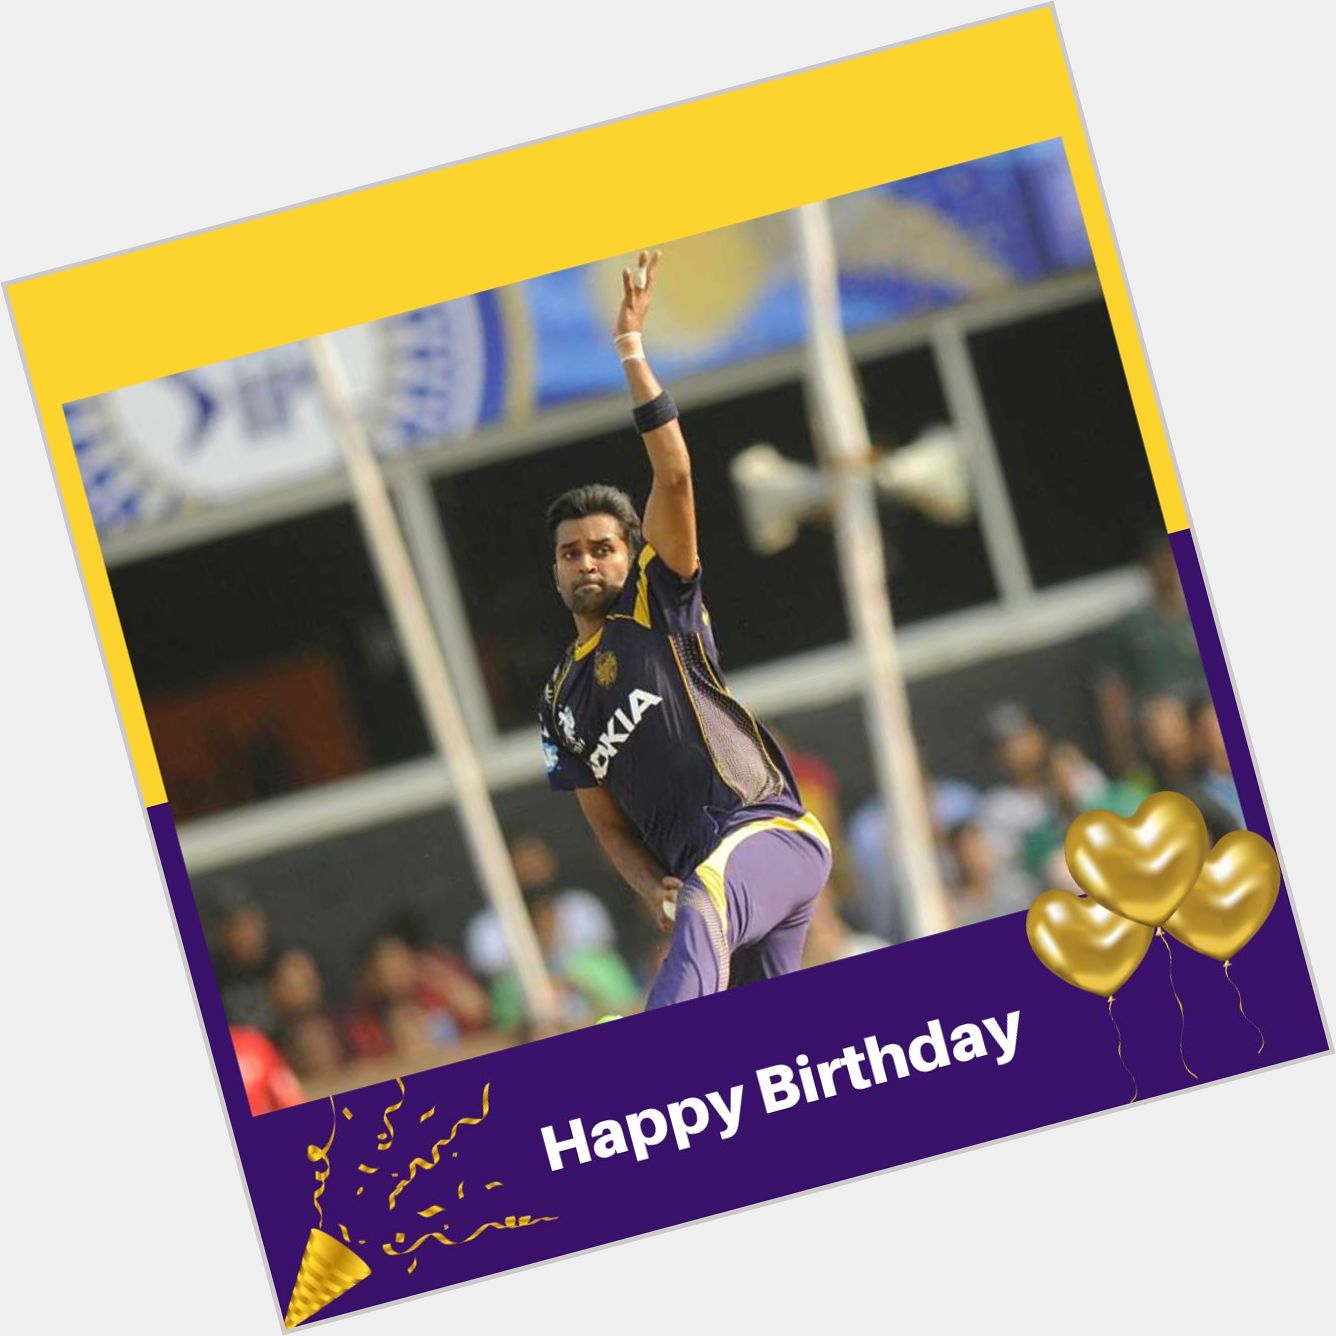 Wishing a very happy birthday to our former Knight, R Vinay Kumar.

He was bought by KKR today in 2014. 